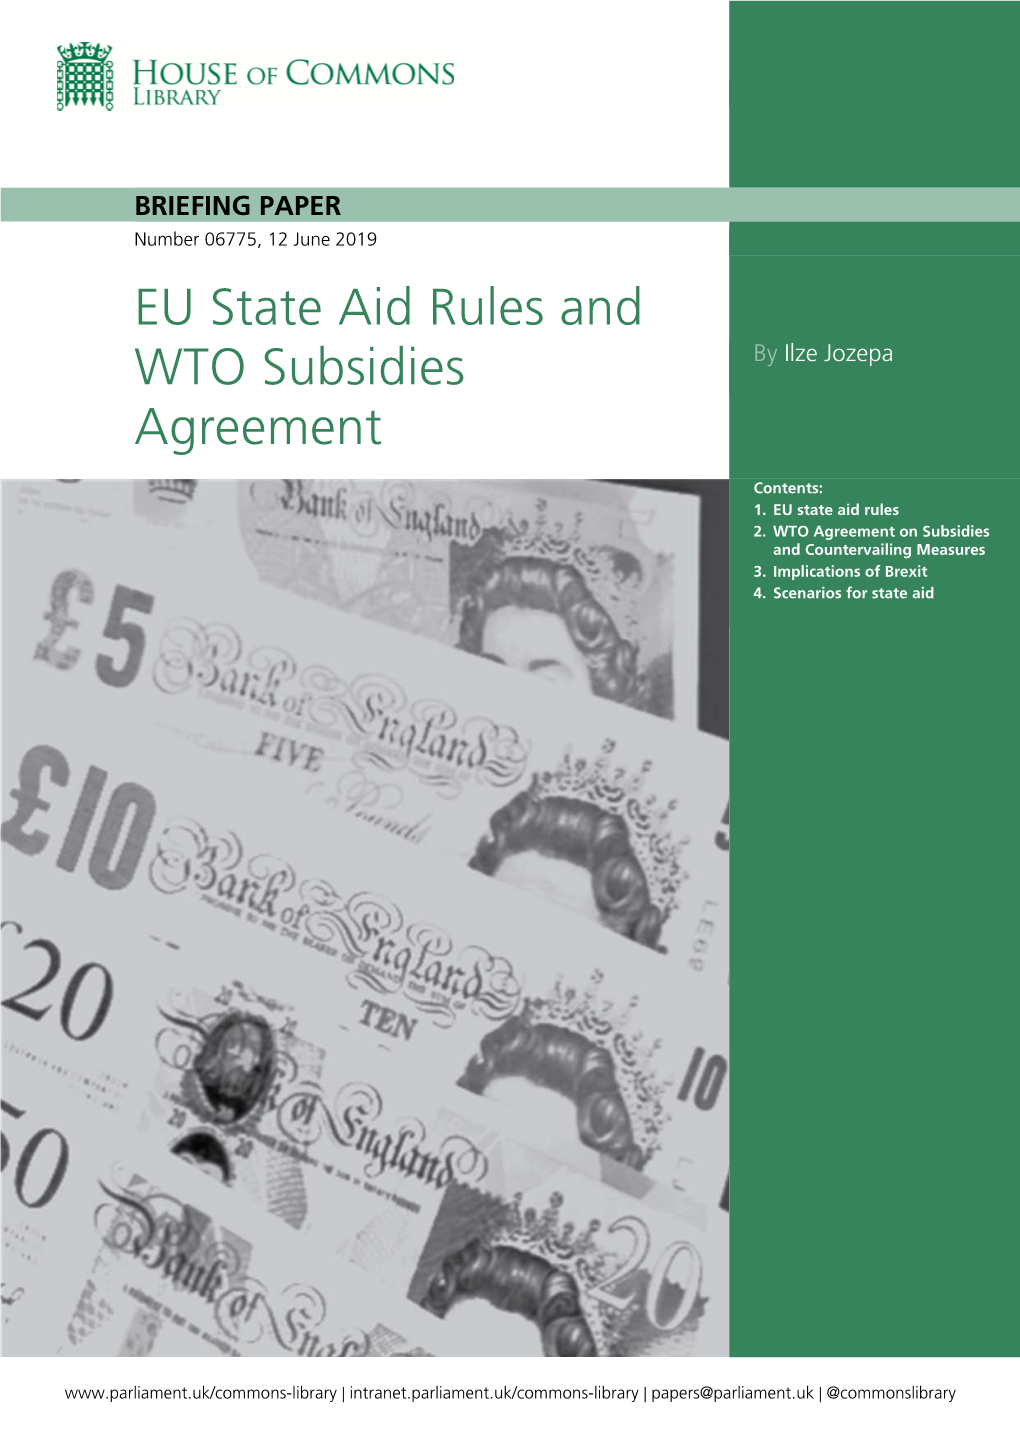 EU State Aid Rules and WTO Subsidies Agreement